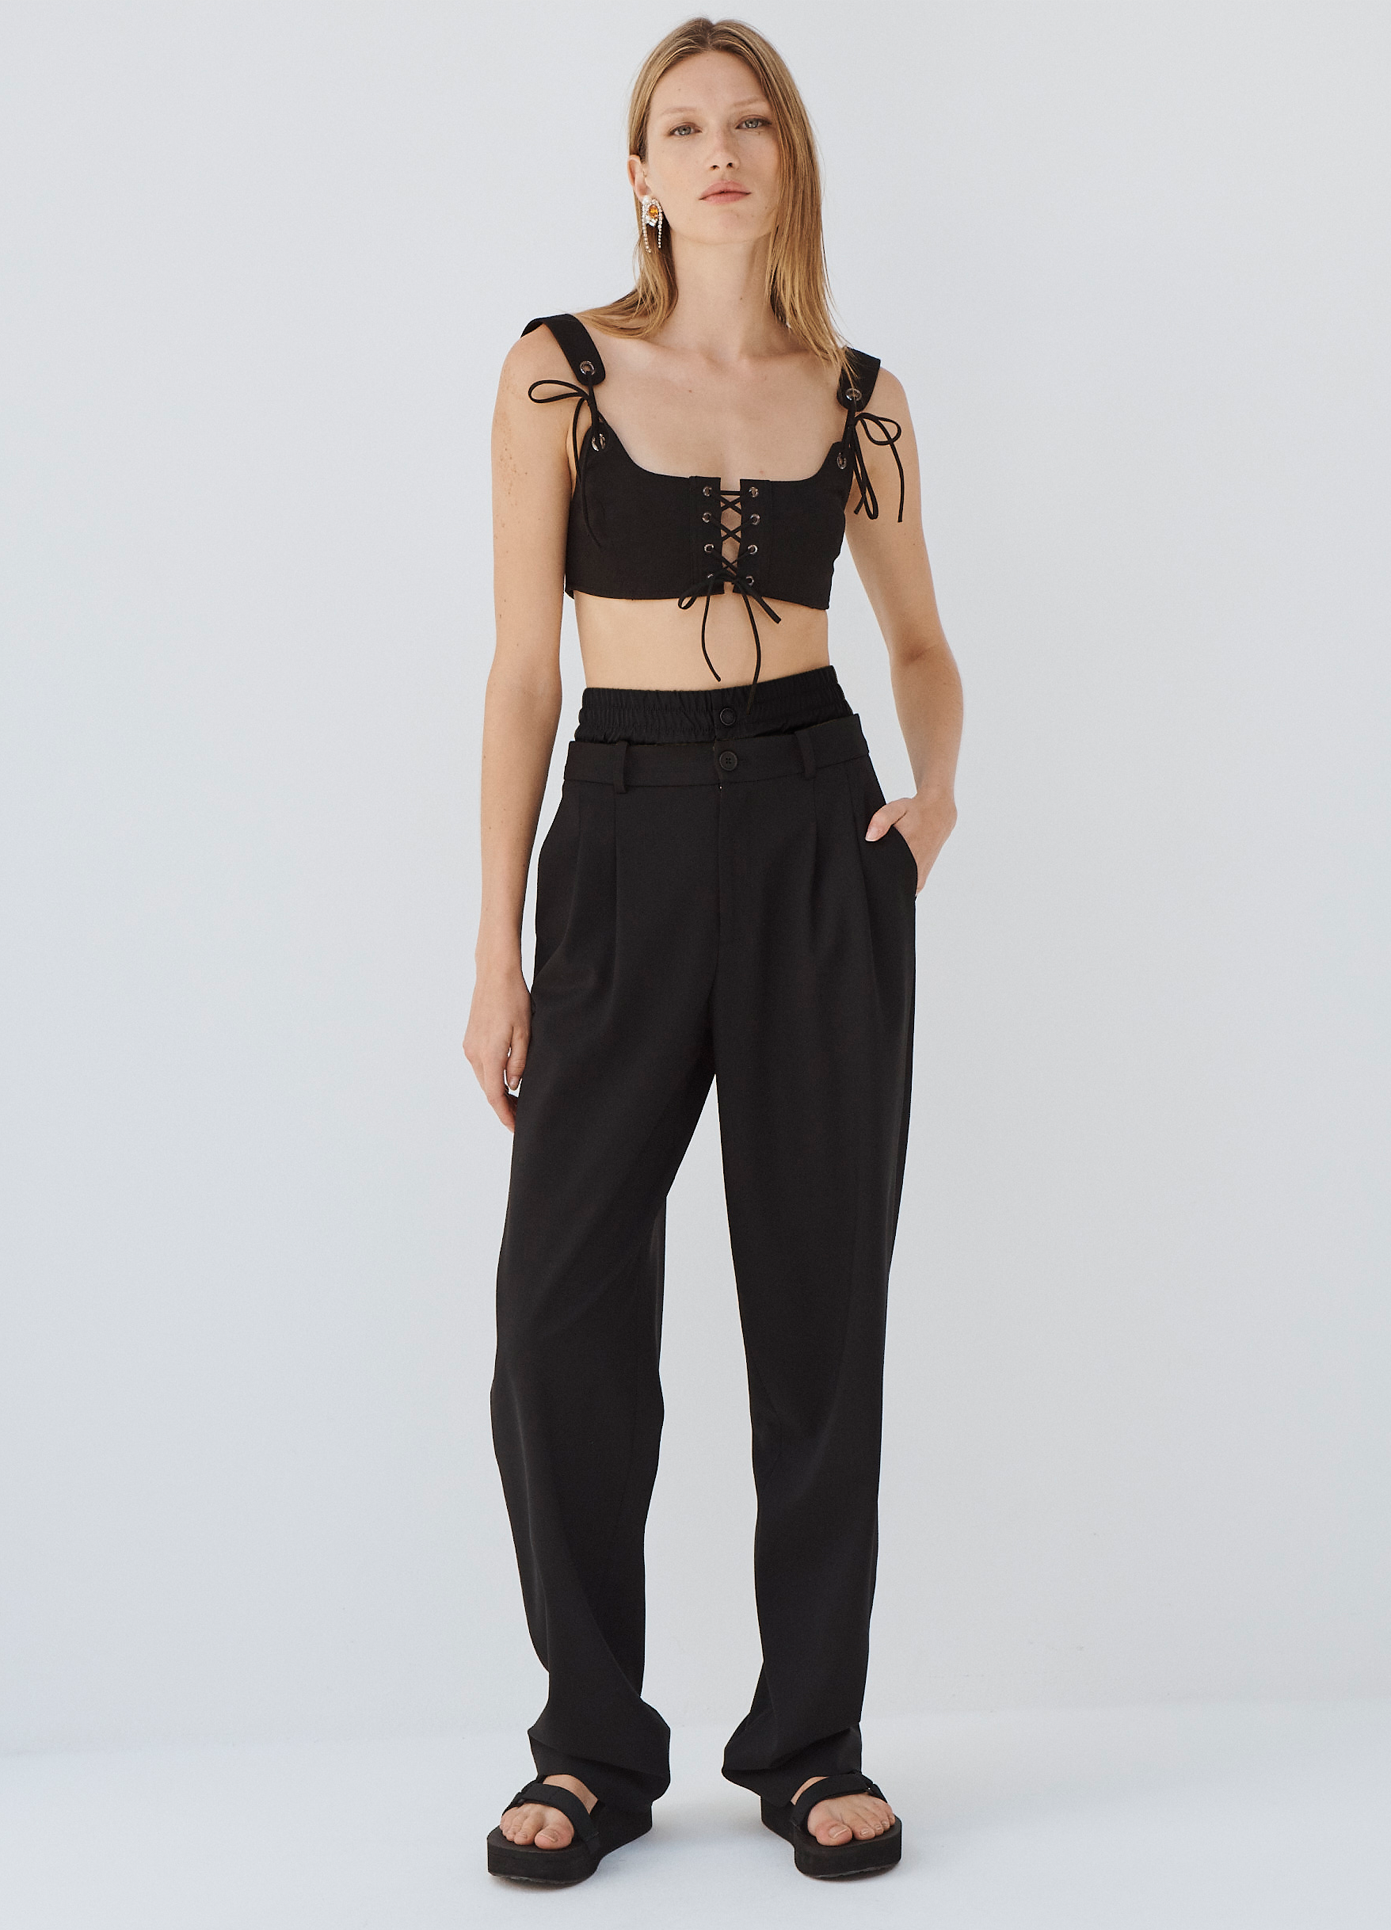 MONSE Double Waistband Trouser in Black on model full front view main image